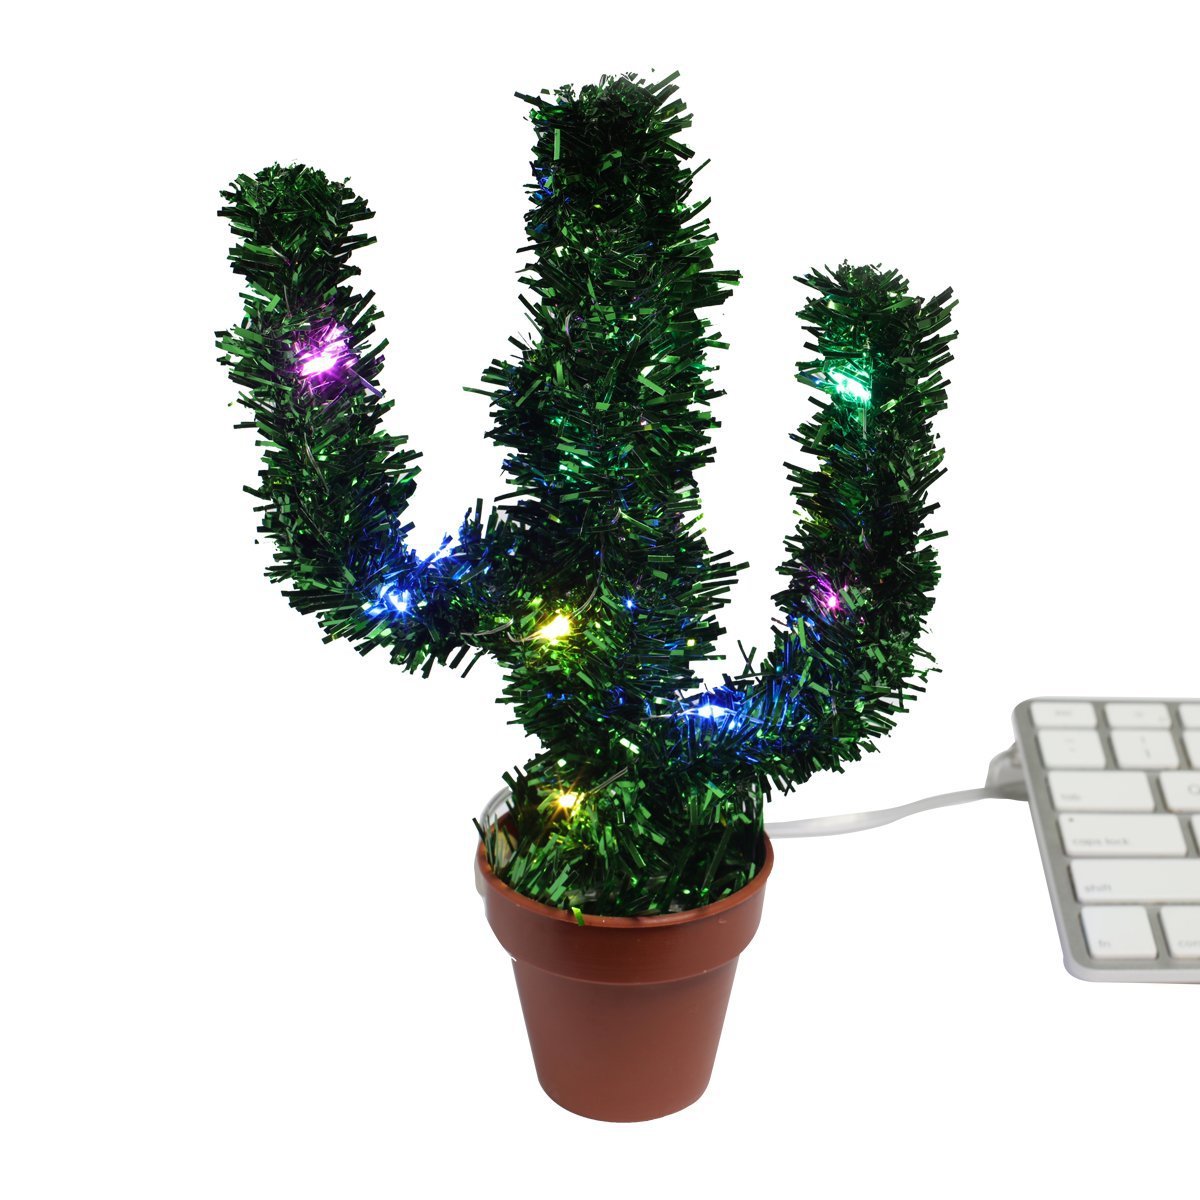 DCI Merry Christmas Cactus with LED Lights USB Powered